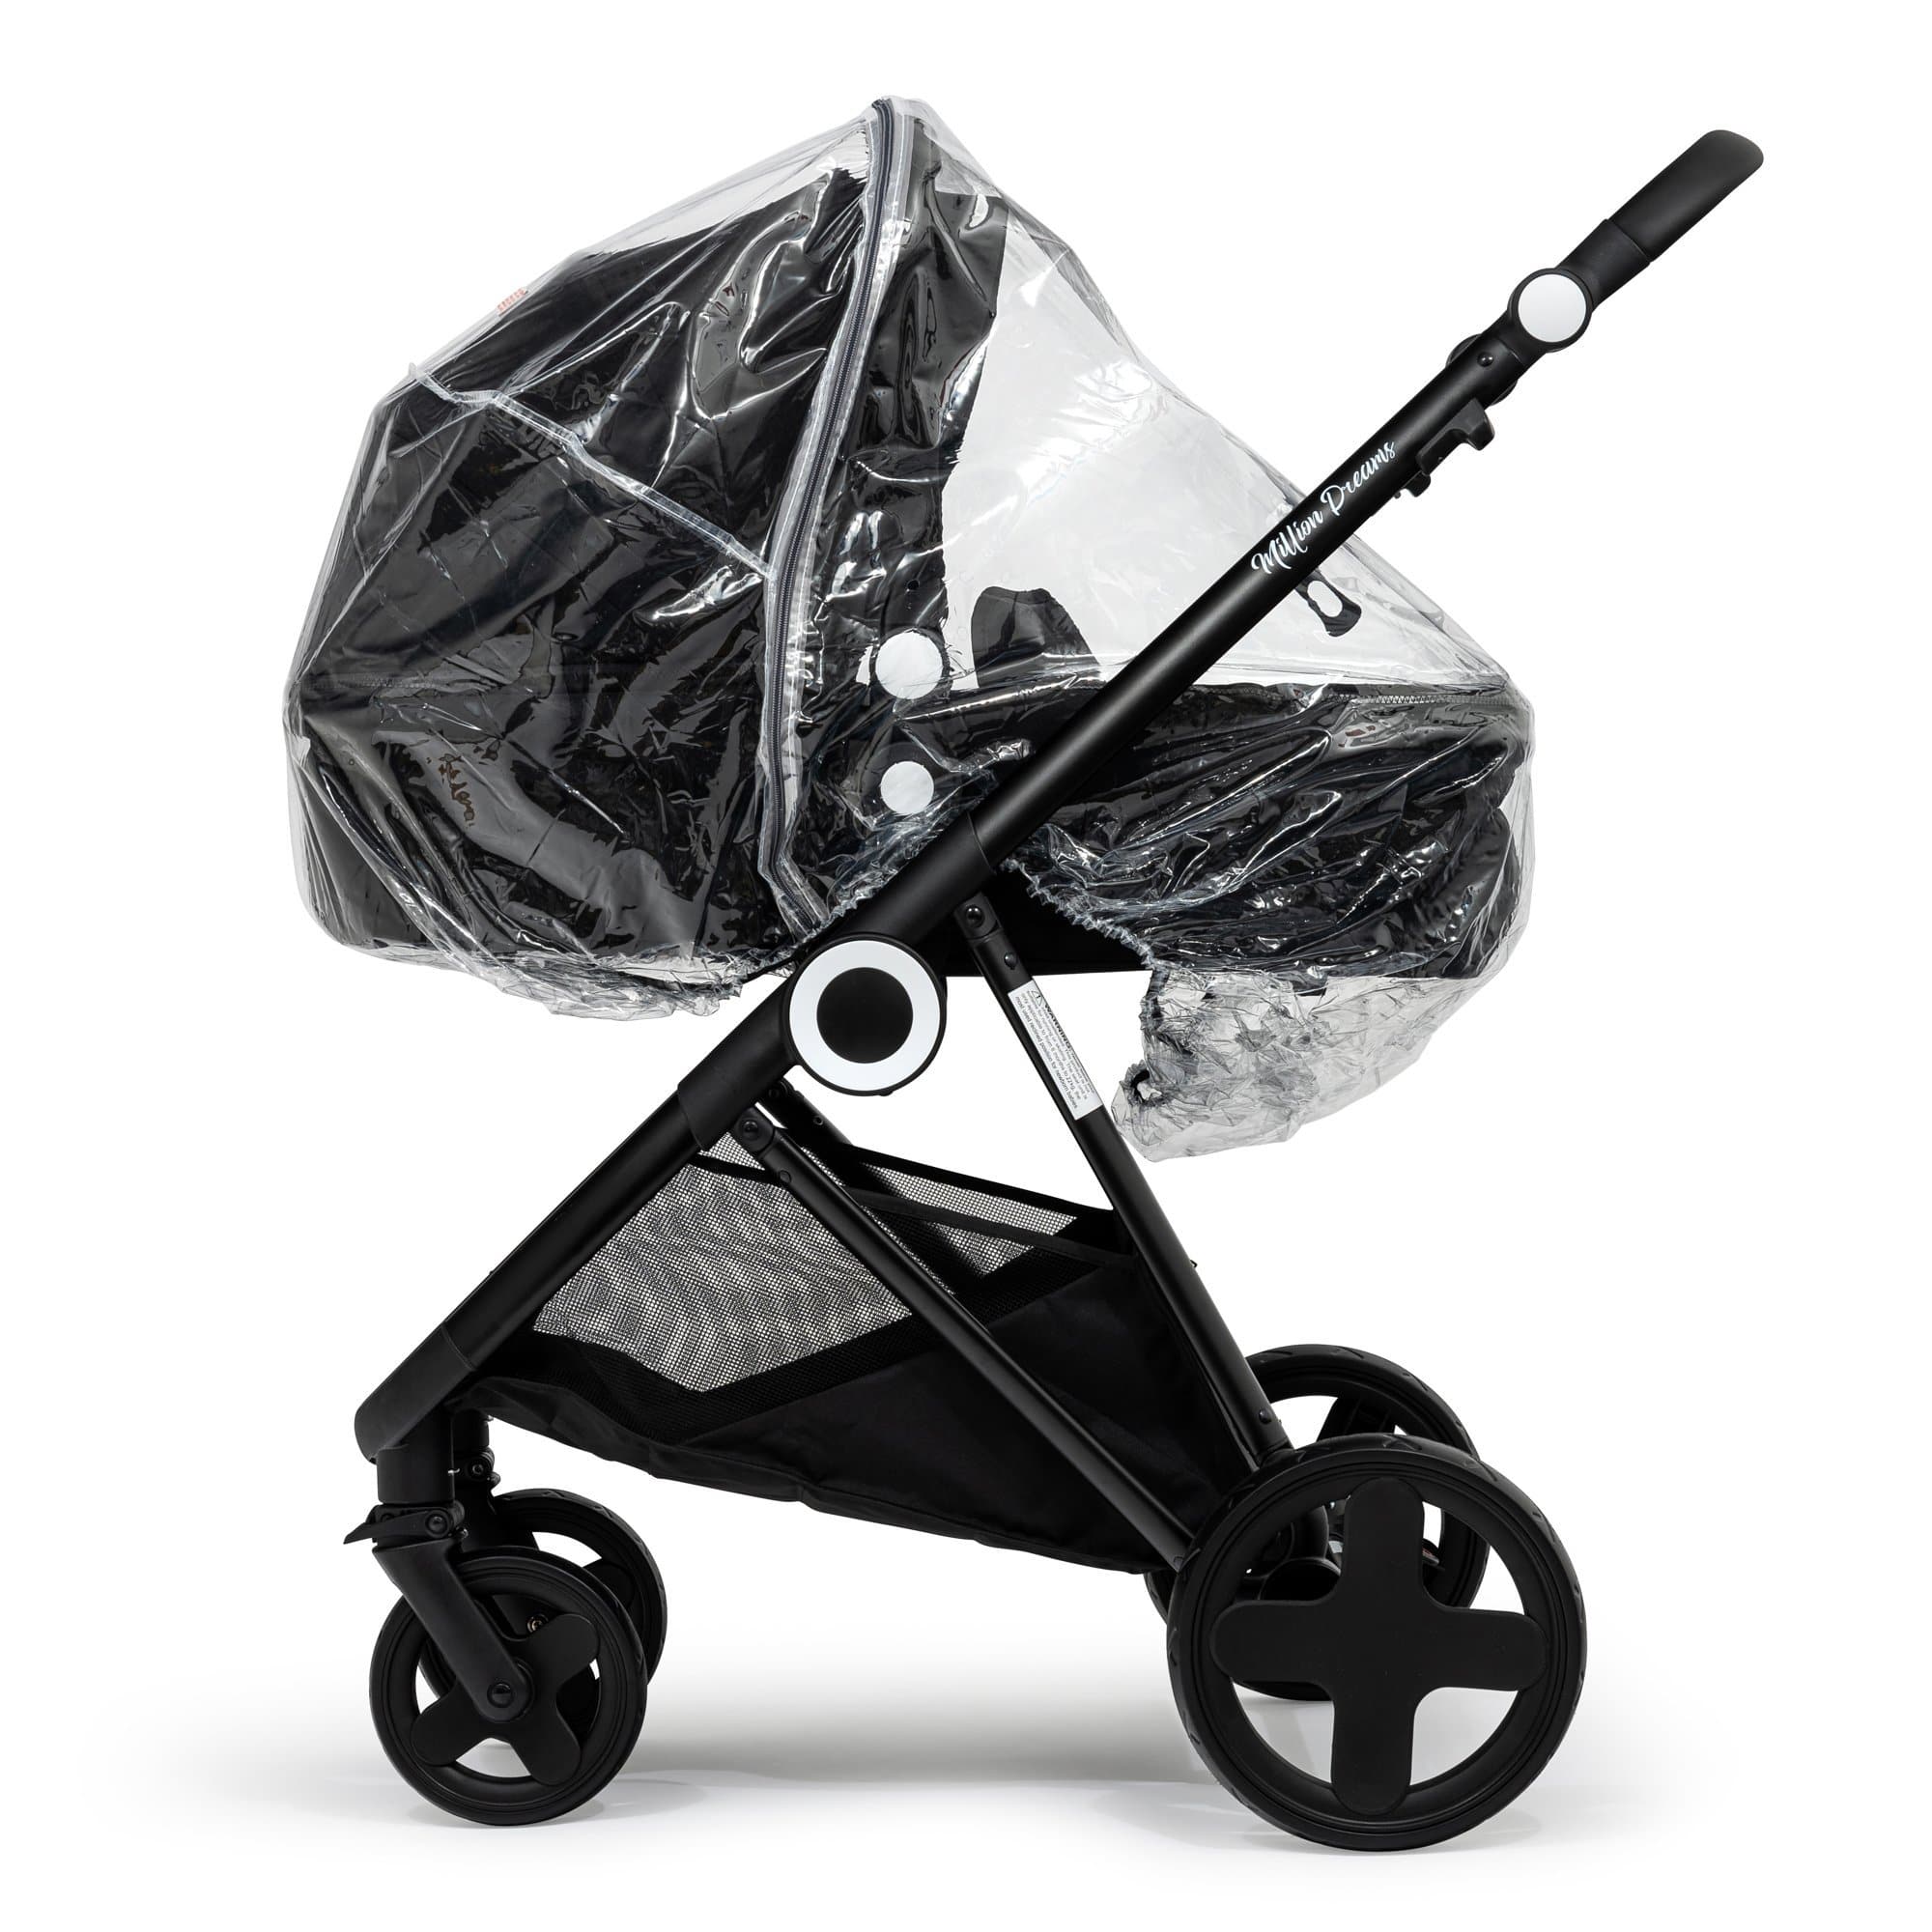 2 in 1 Rain Cover Compatible with I'coo - Fits All Models - For Your Little One